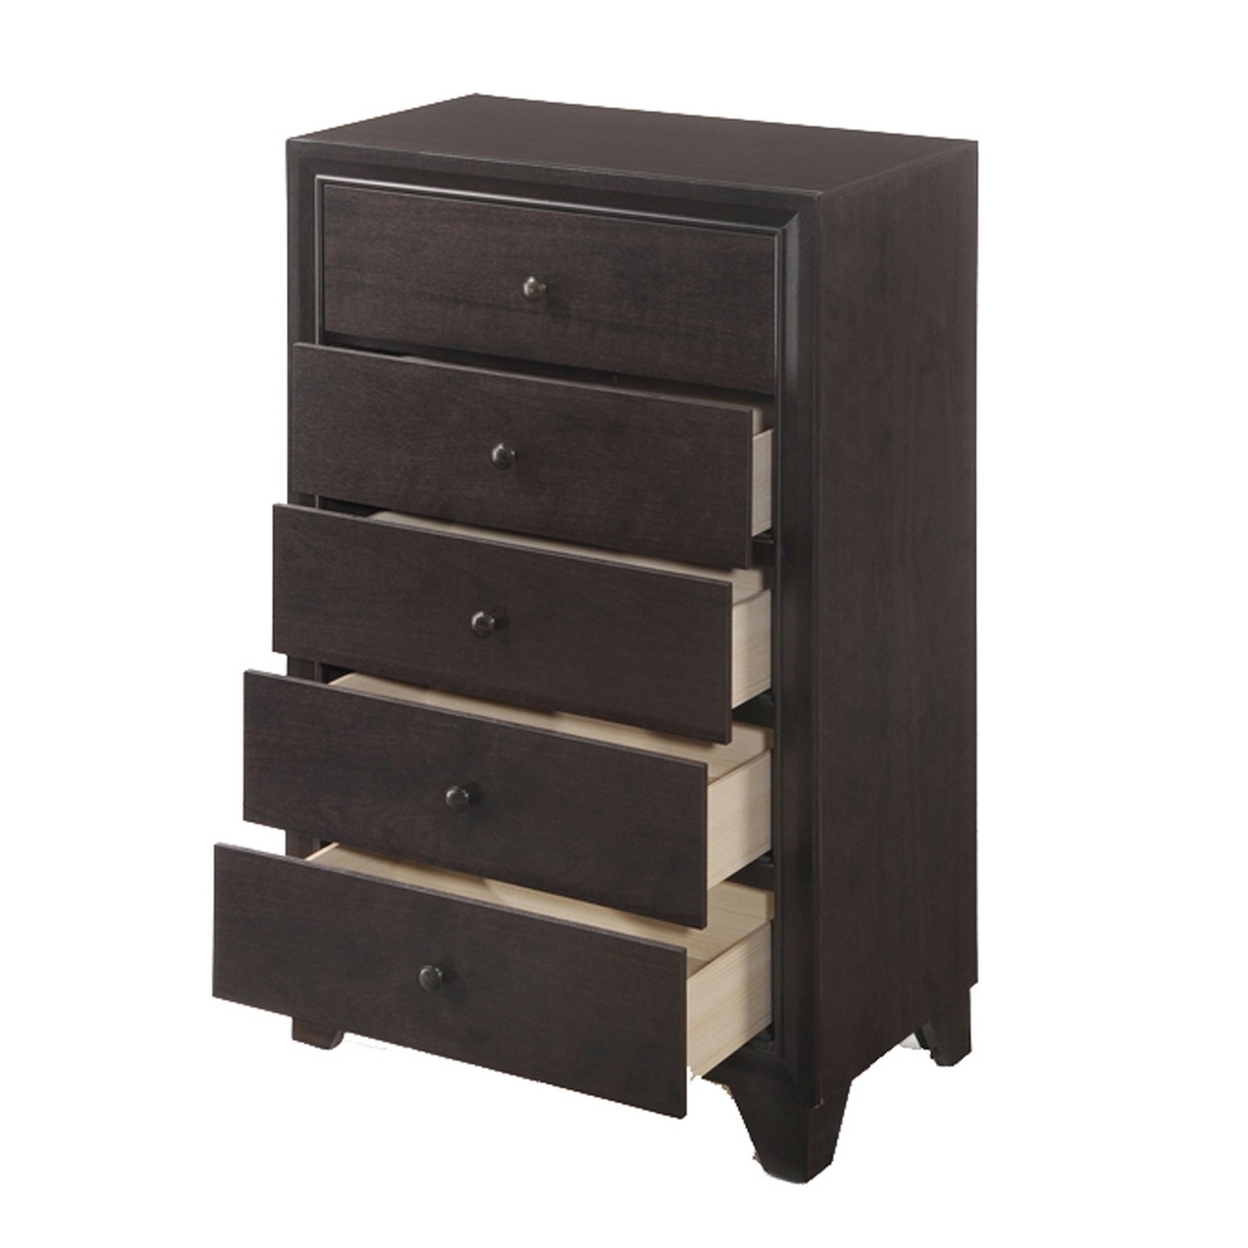 Wooden Chest With 5 Spacious Drawers , Espresso Brown- Saltoro Sherpi